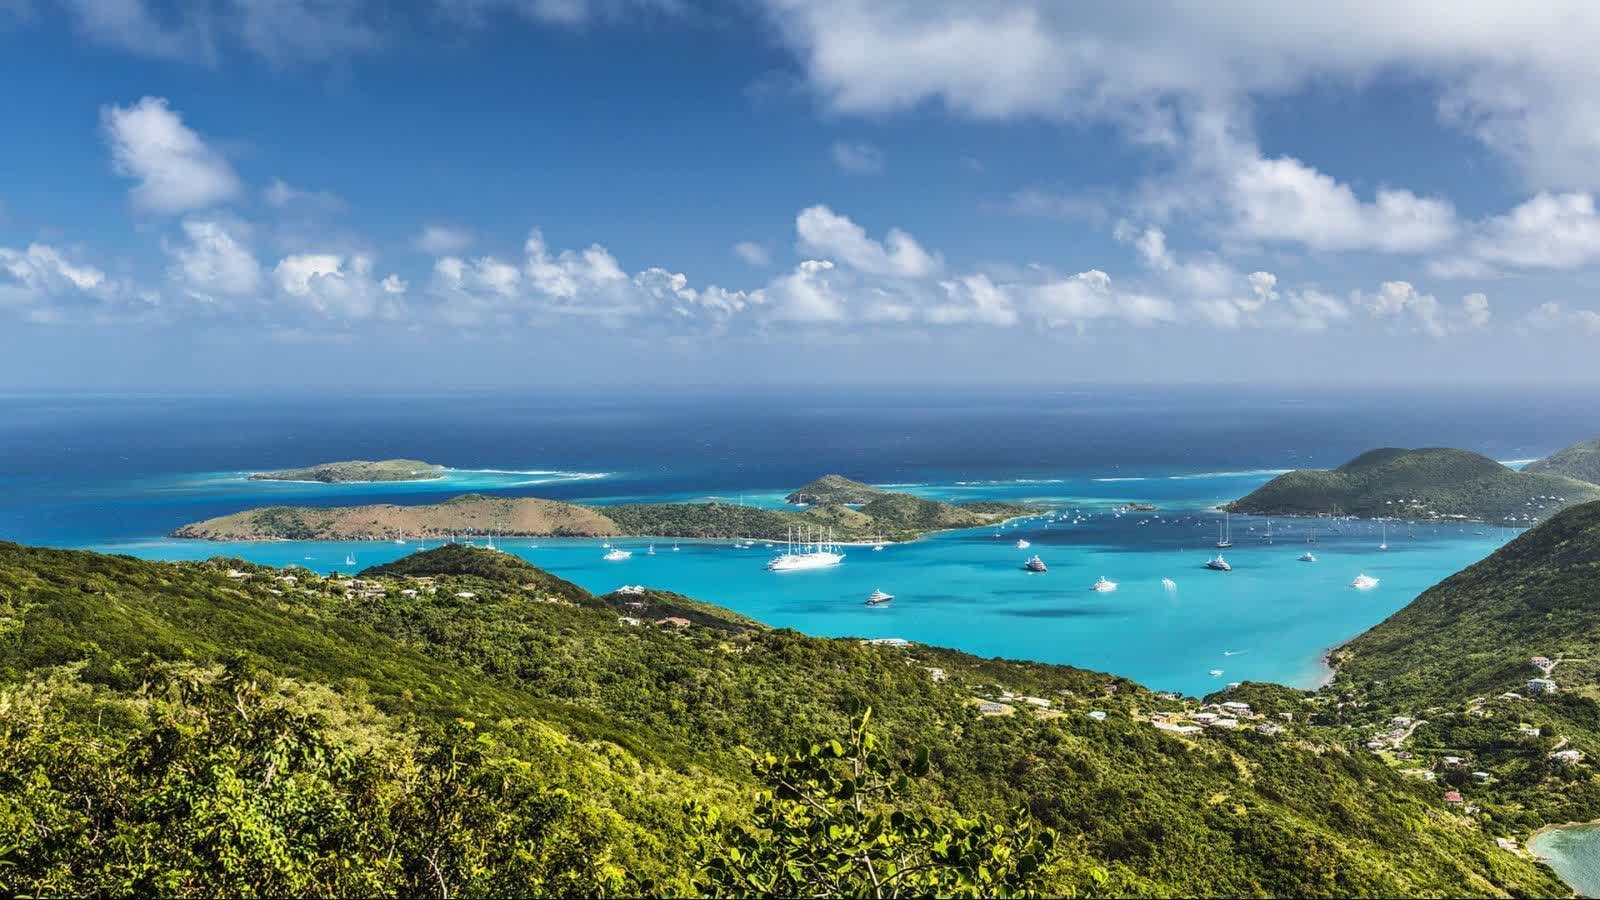 PureVPN moves HQ to the British Virgin Islands, because where a VPN is located matters